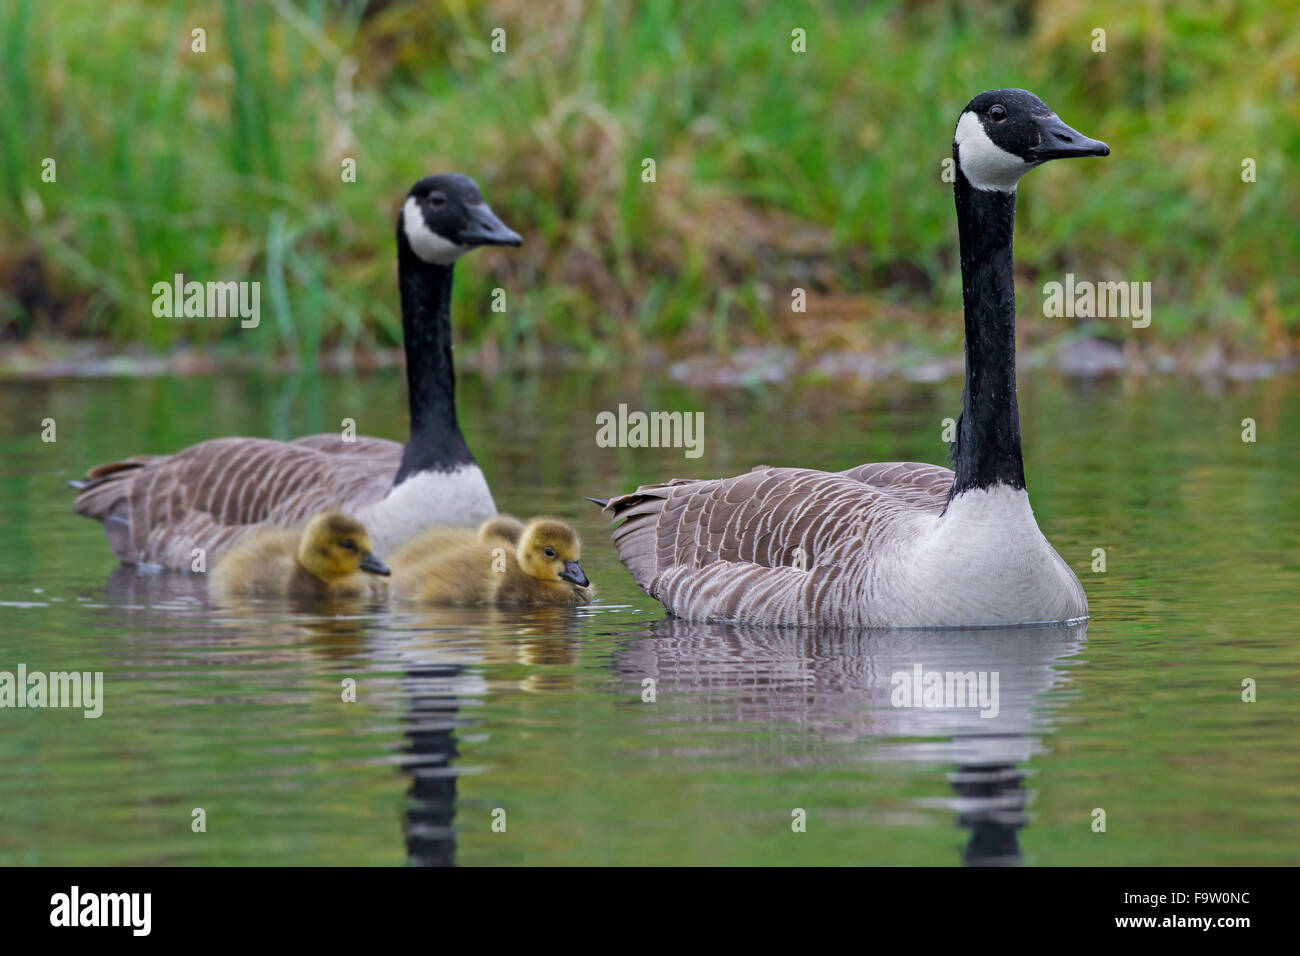 Canada geese (Branta canadensis) parents swimming with goslings in lake Stock Photo